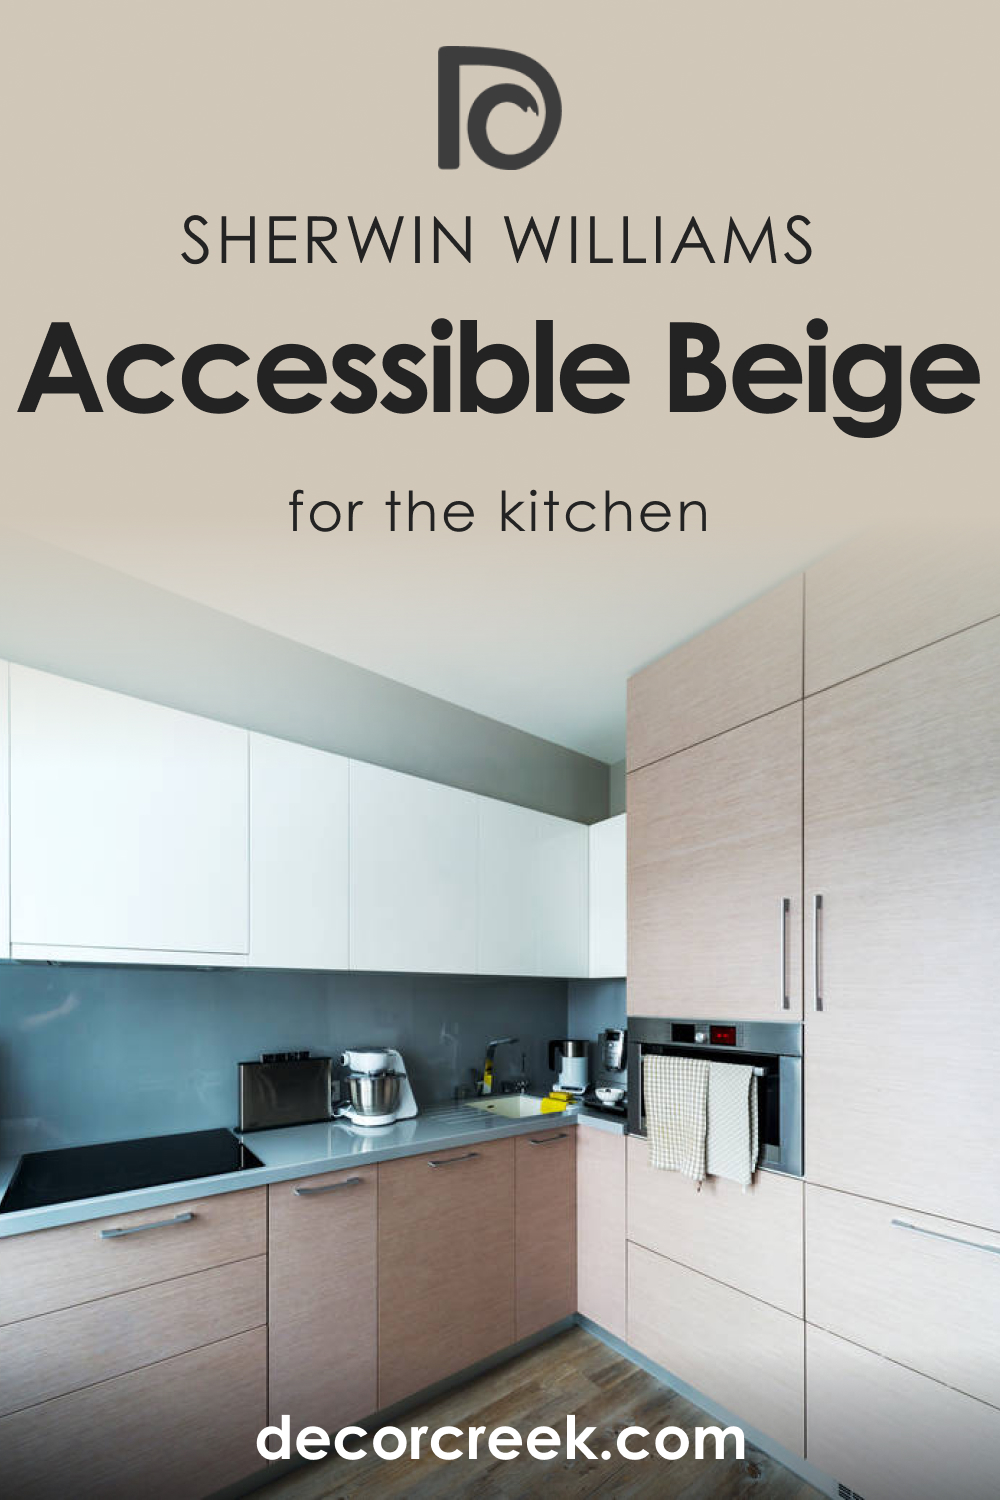 How to Use Accessible Beige SW 7036 in the Kitchen?